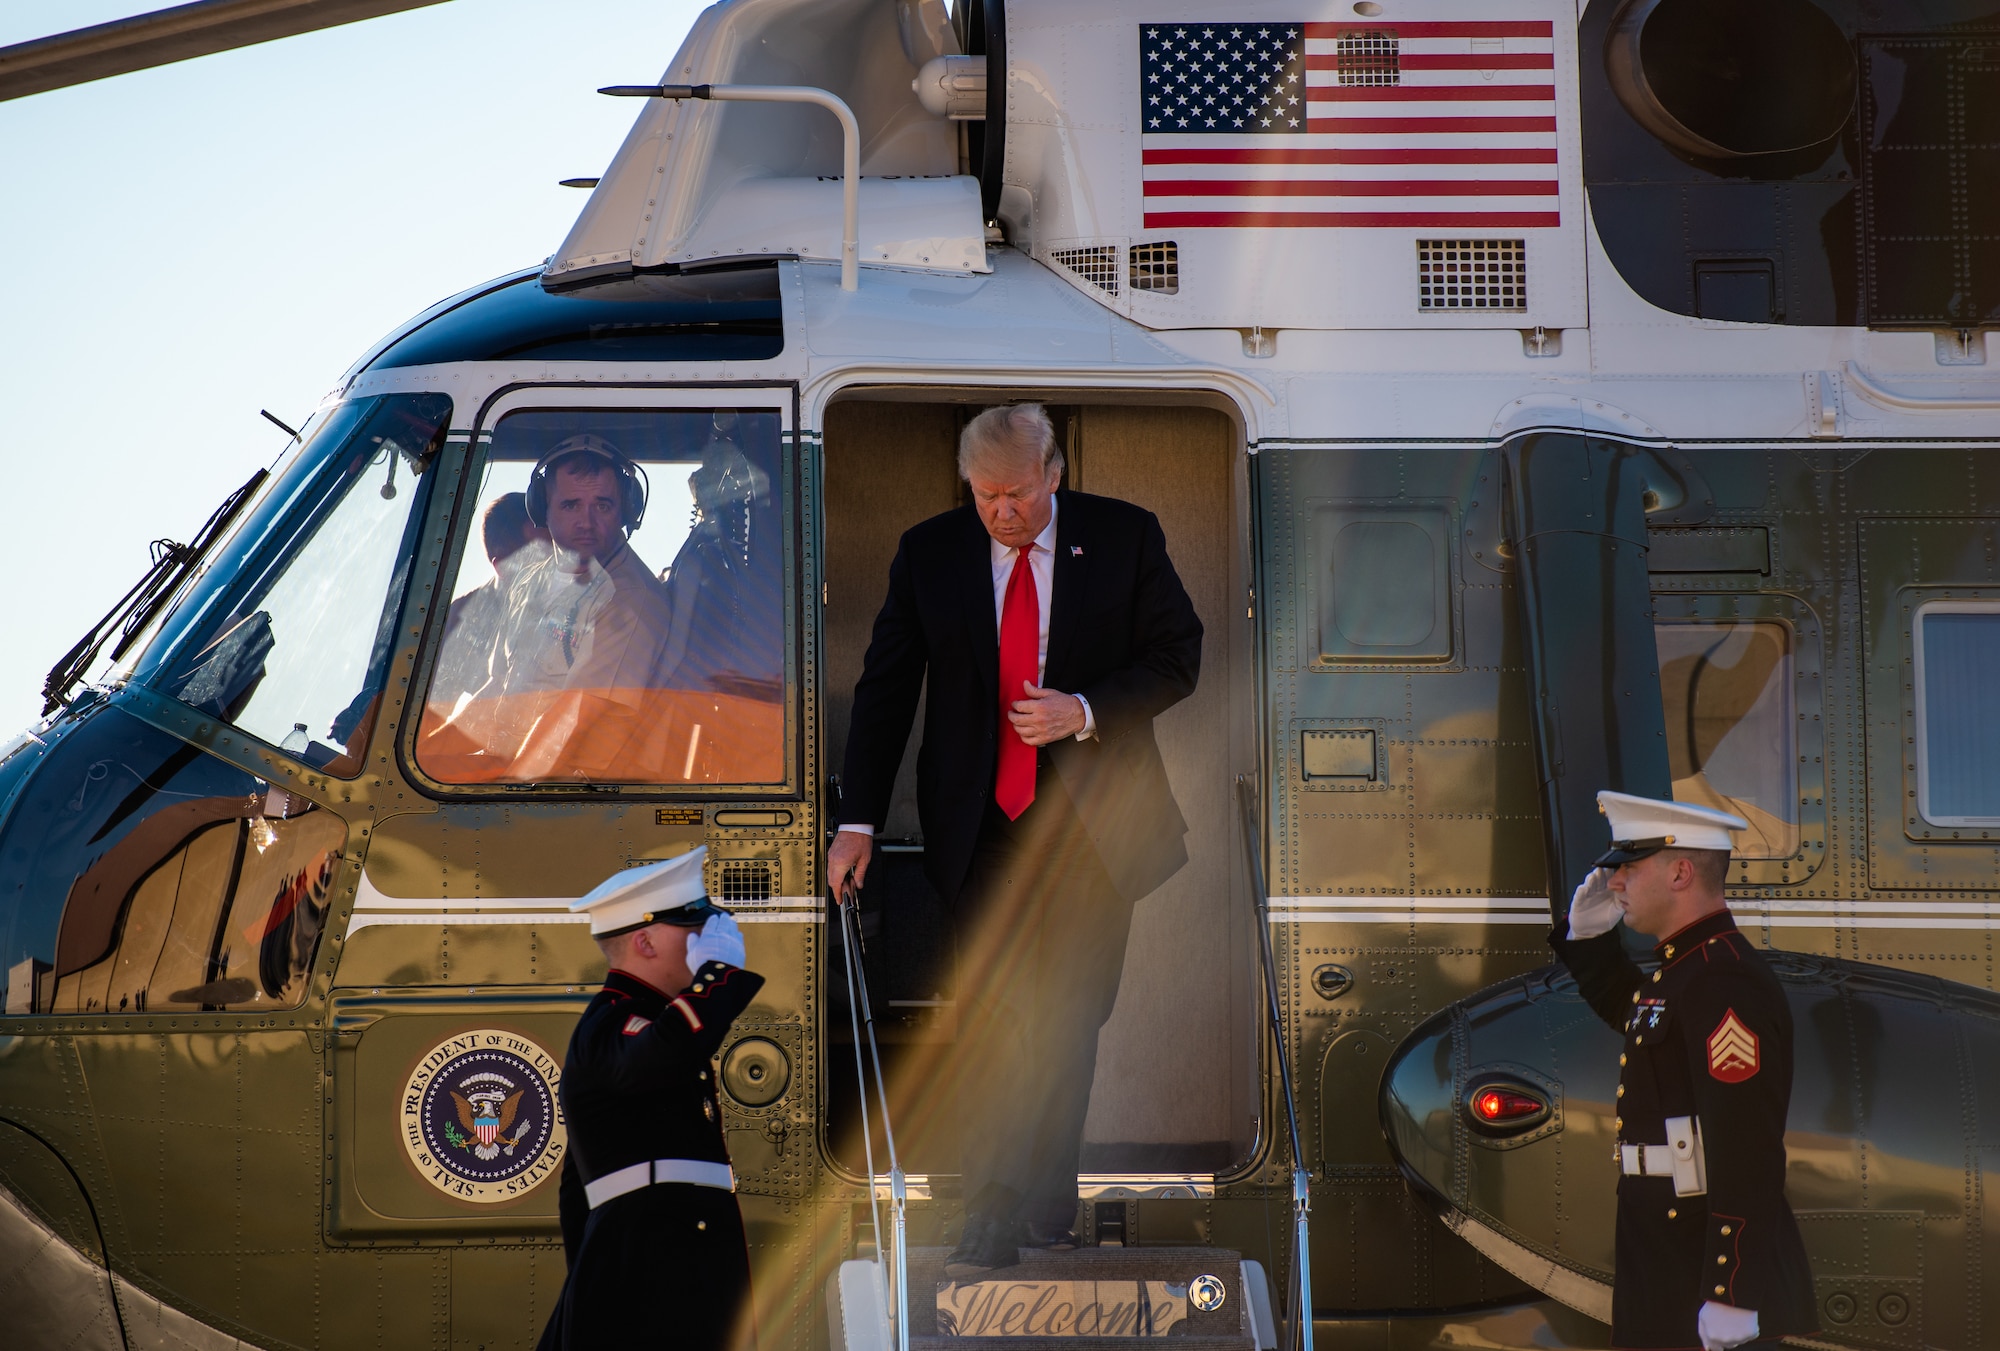 President Donald J. Trump arrives in Marine One to Luke Air Force Base, Ariz., Oct. 19, 2018. President Trump visited the base to discuss military weapons and technology capabilities and learn about the 56th Fighter Wing’s pilot training mission (U.S. Air Force photo by Senior Airman Alexander Cook)